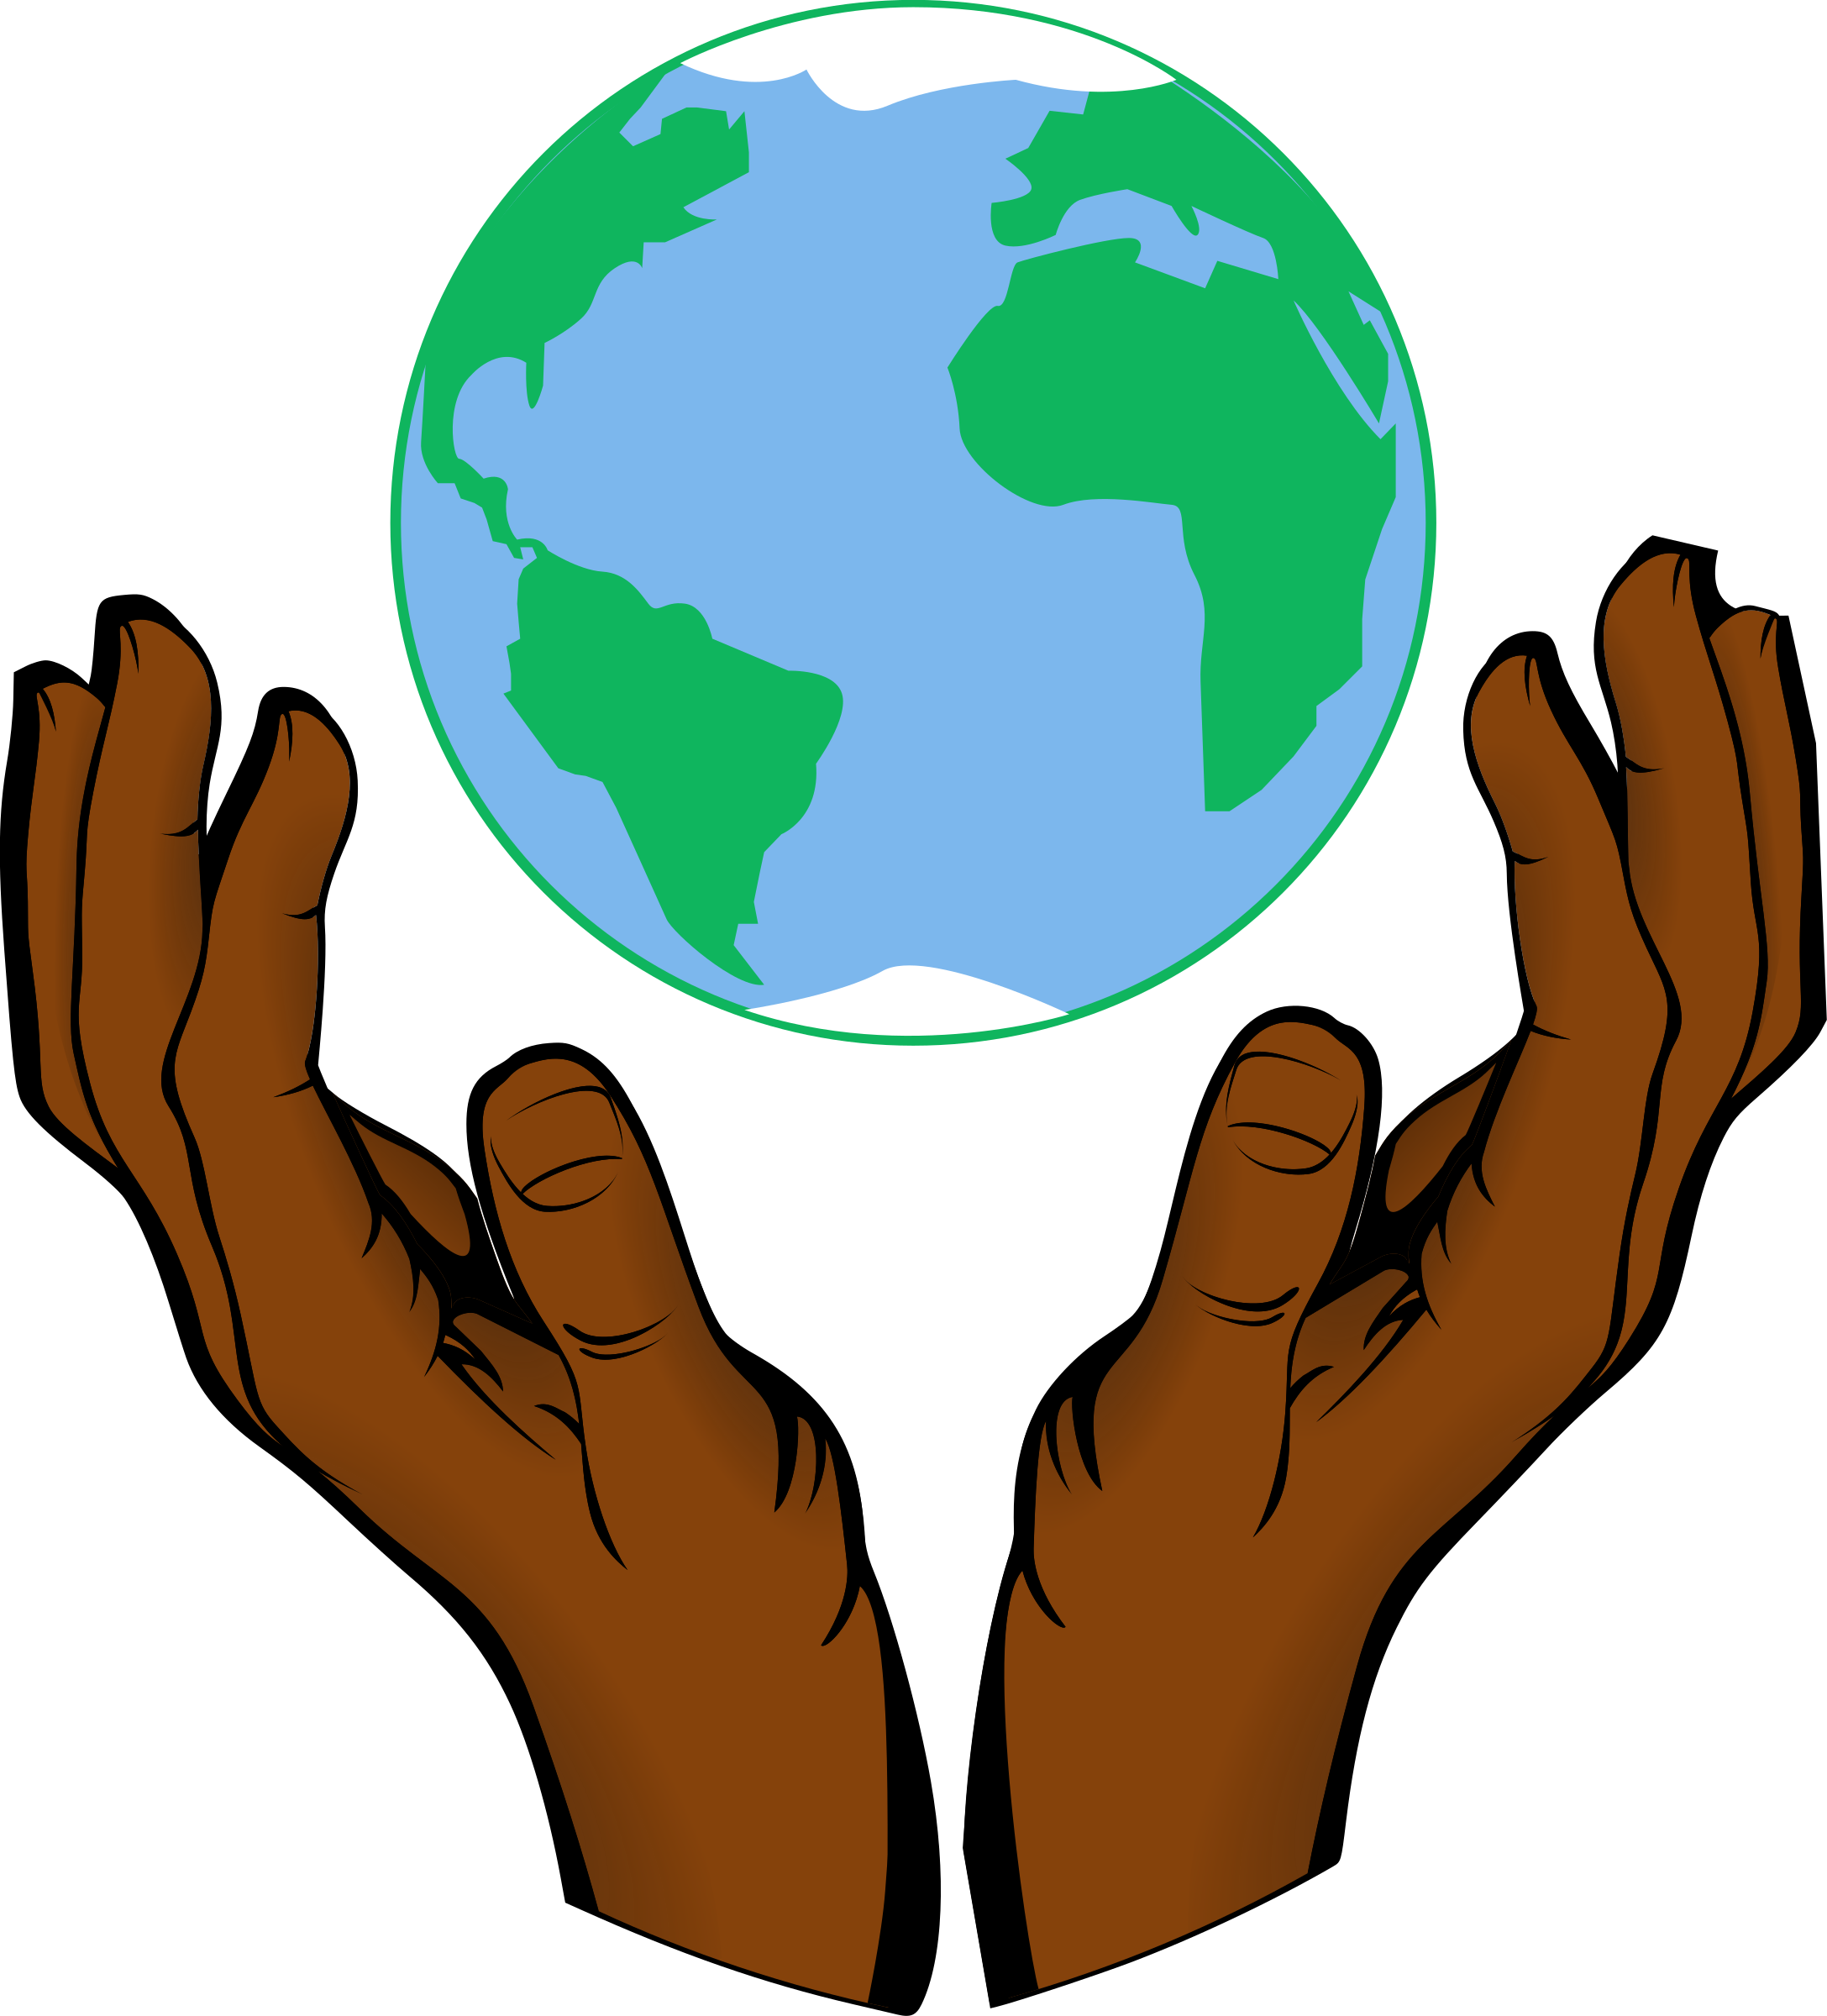 Hands Holding A Planet Earth